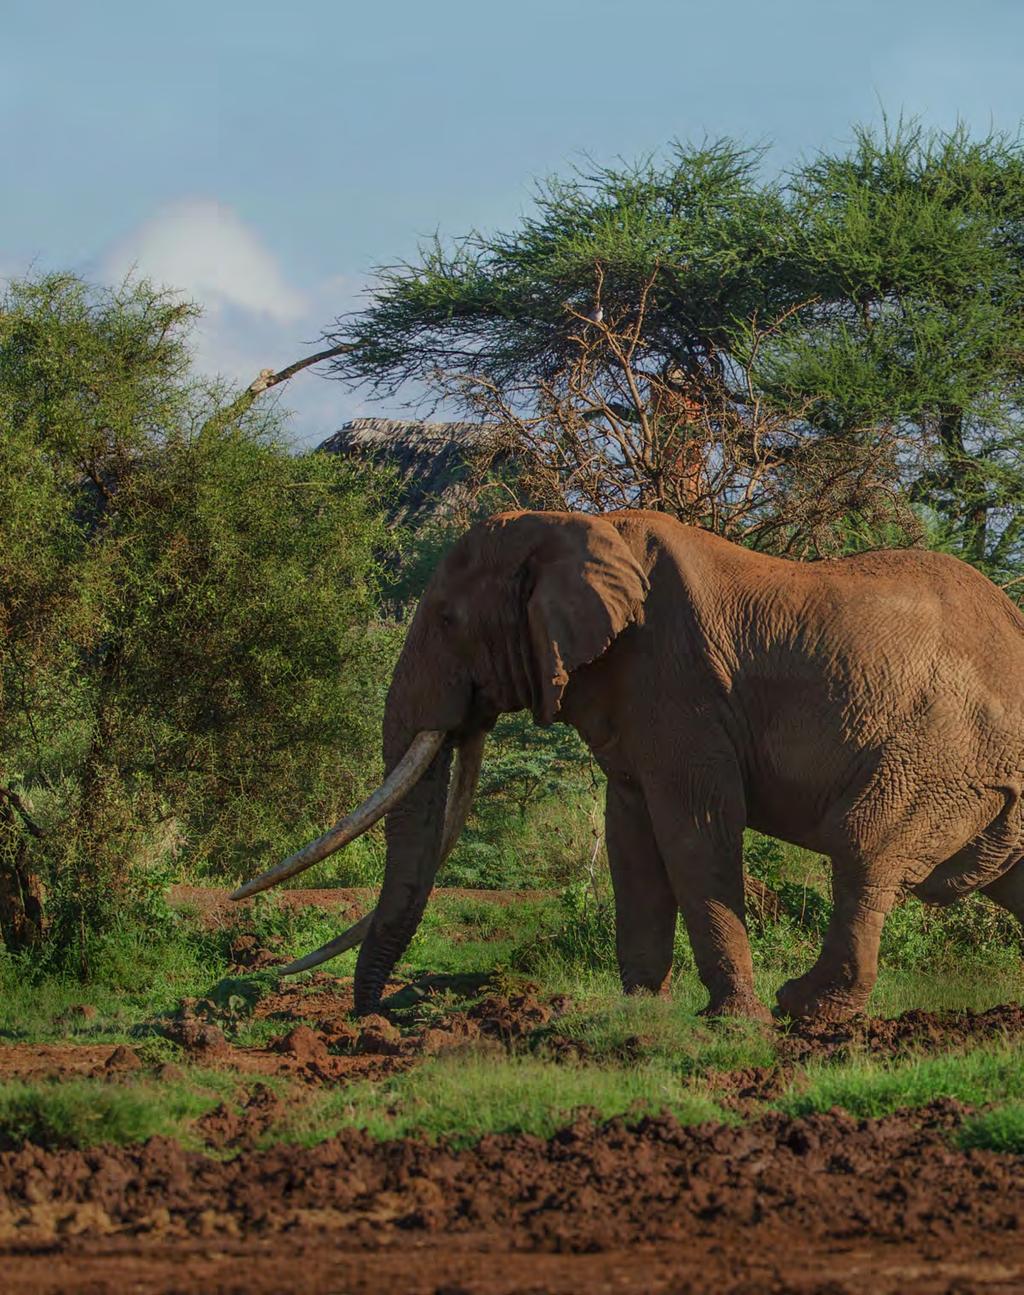 DAYS 3 & 4 TAWI LODGE AMBOSELI NATIONAL PARK Get your checklist ready Activities included Keep your camera close DAYS 3 & 4 Tawi Lodge Amboseli National Park Elephants celebrate birth, have lifelong